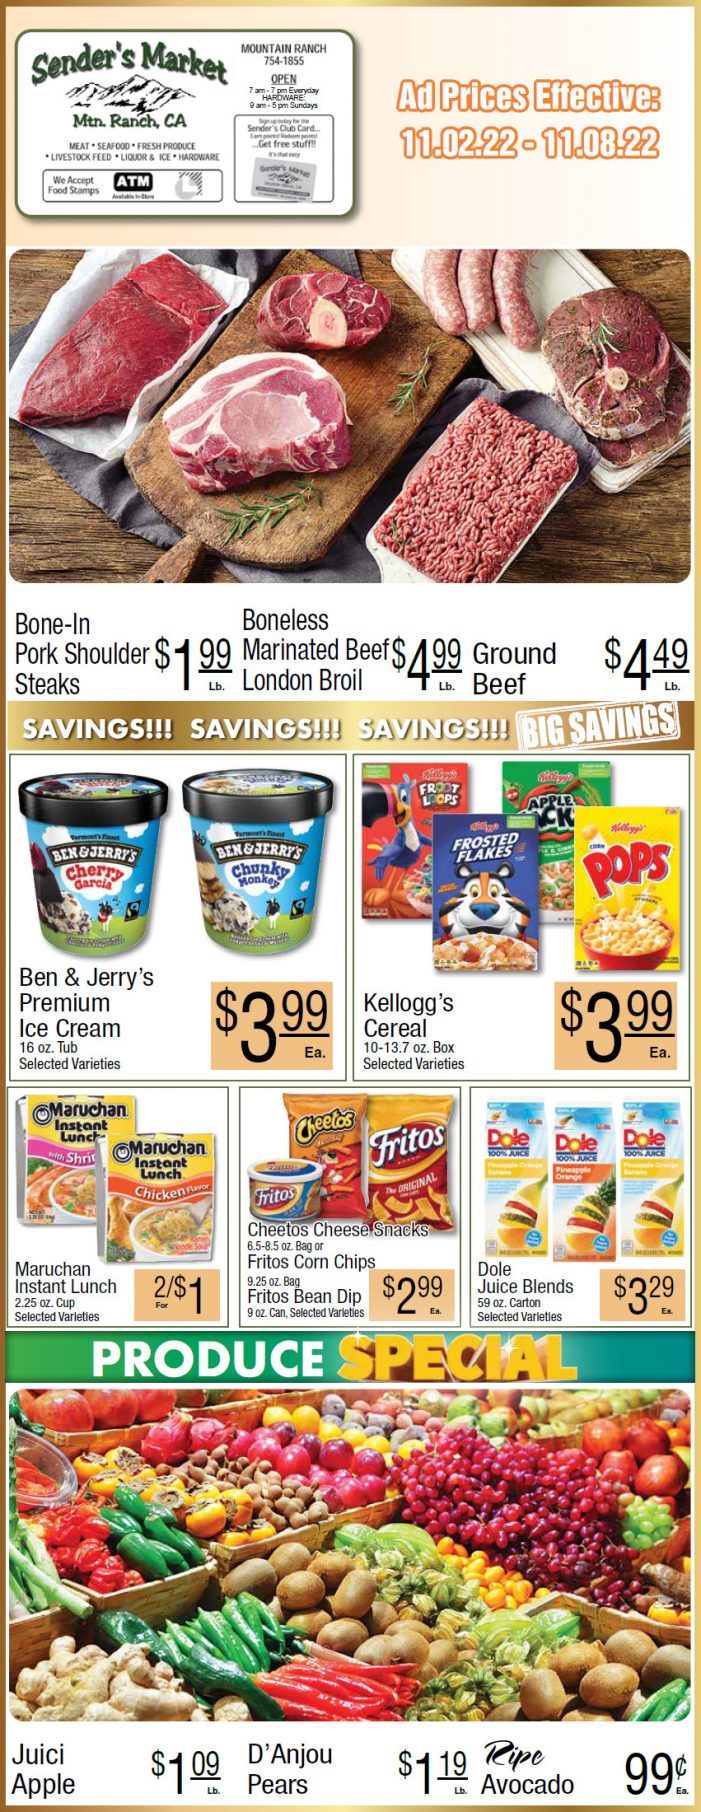 Sender’s Market Weekly Ad & Grocery Specials Through November 2 – 8! Shop Local & Save!